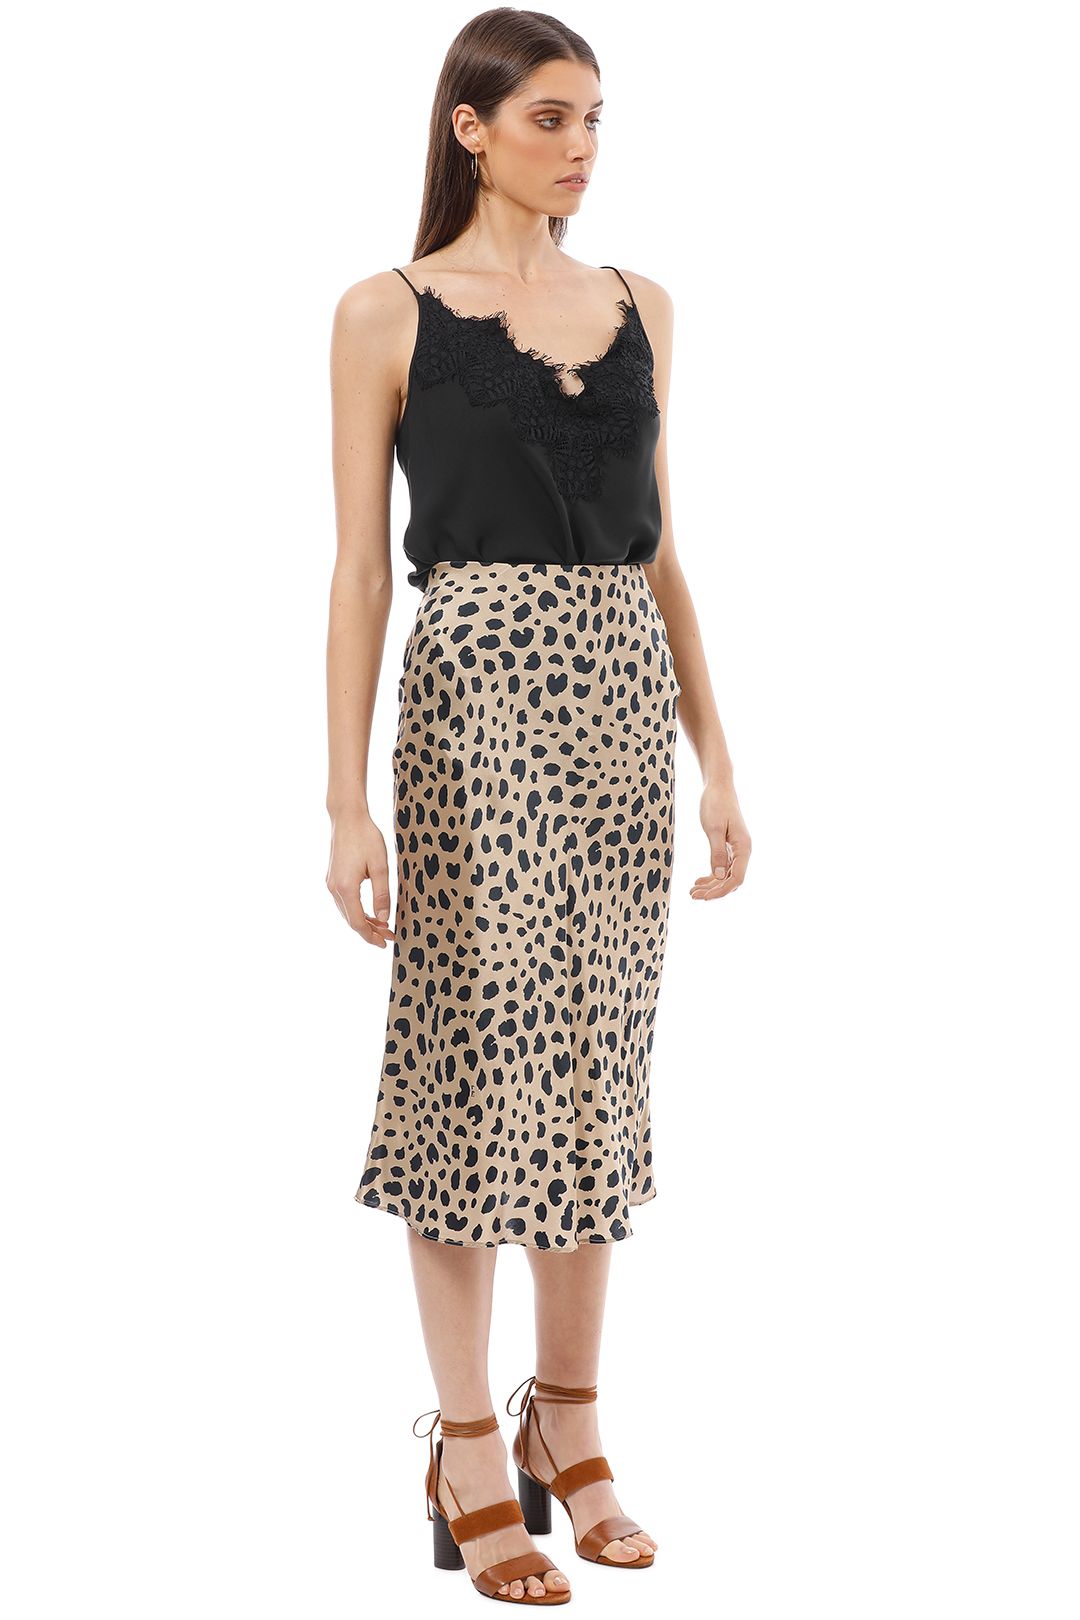 The Naomi Skirt in Wild Things by Realisation Par for Hire